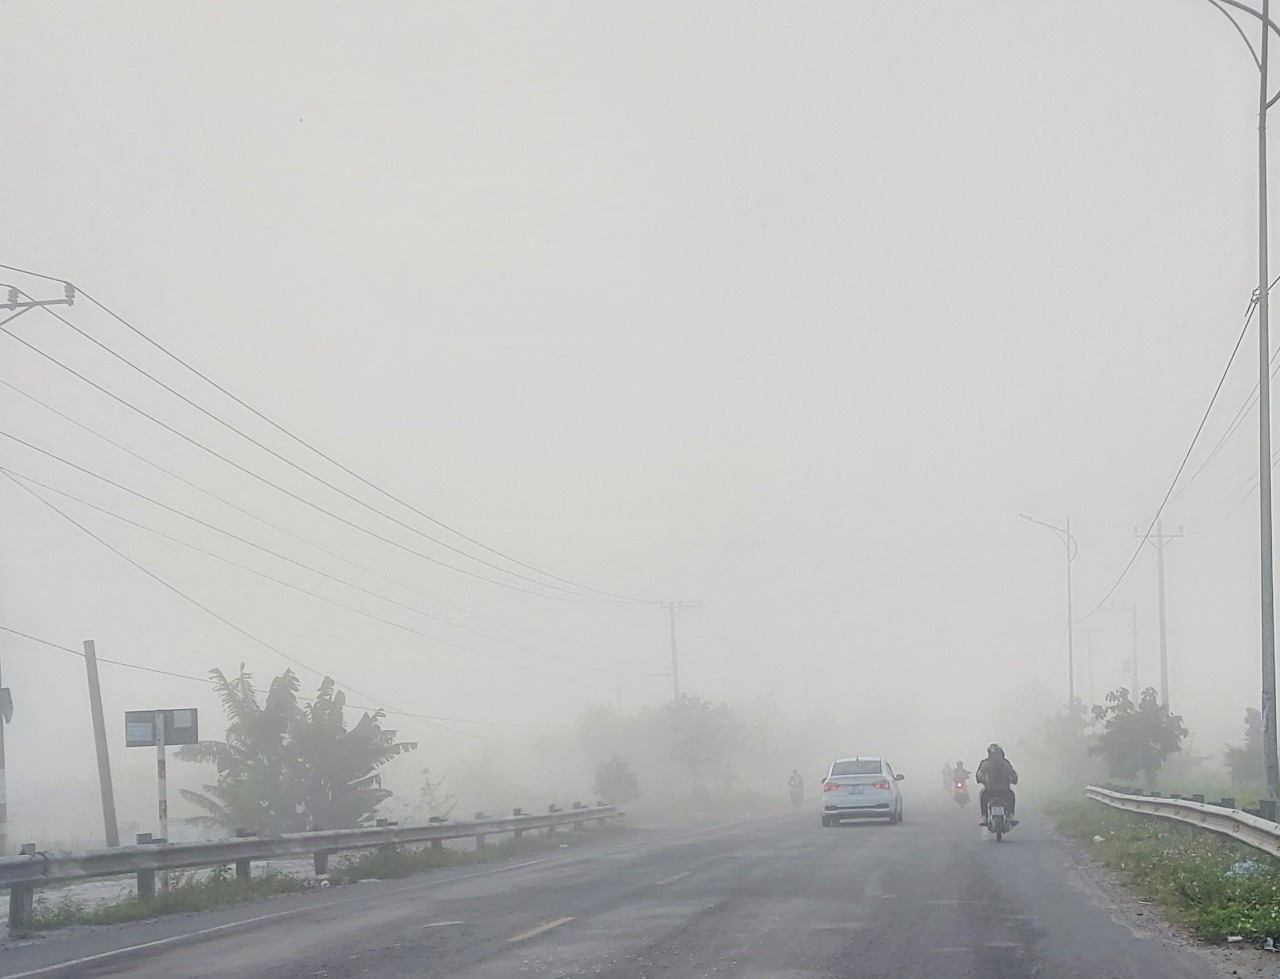 Foggy weather is recorded in Kien Giang Province, Vietnam. January 16, 2022. Photo: Chi Cong / Tuoi Tre